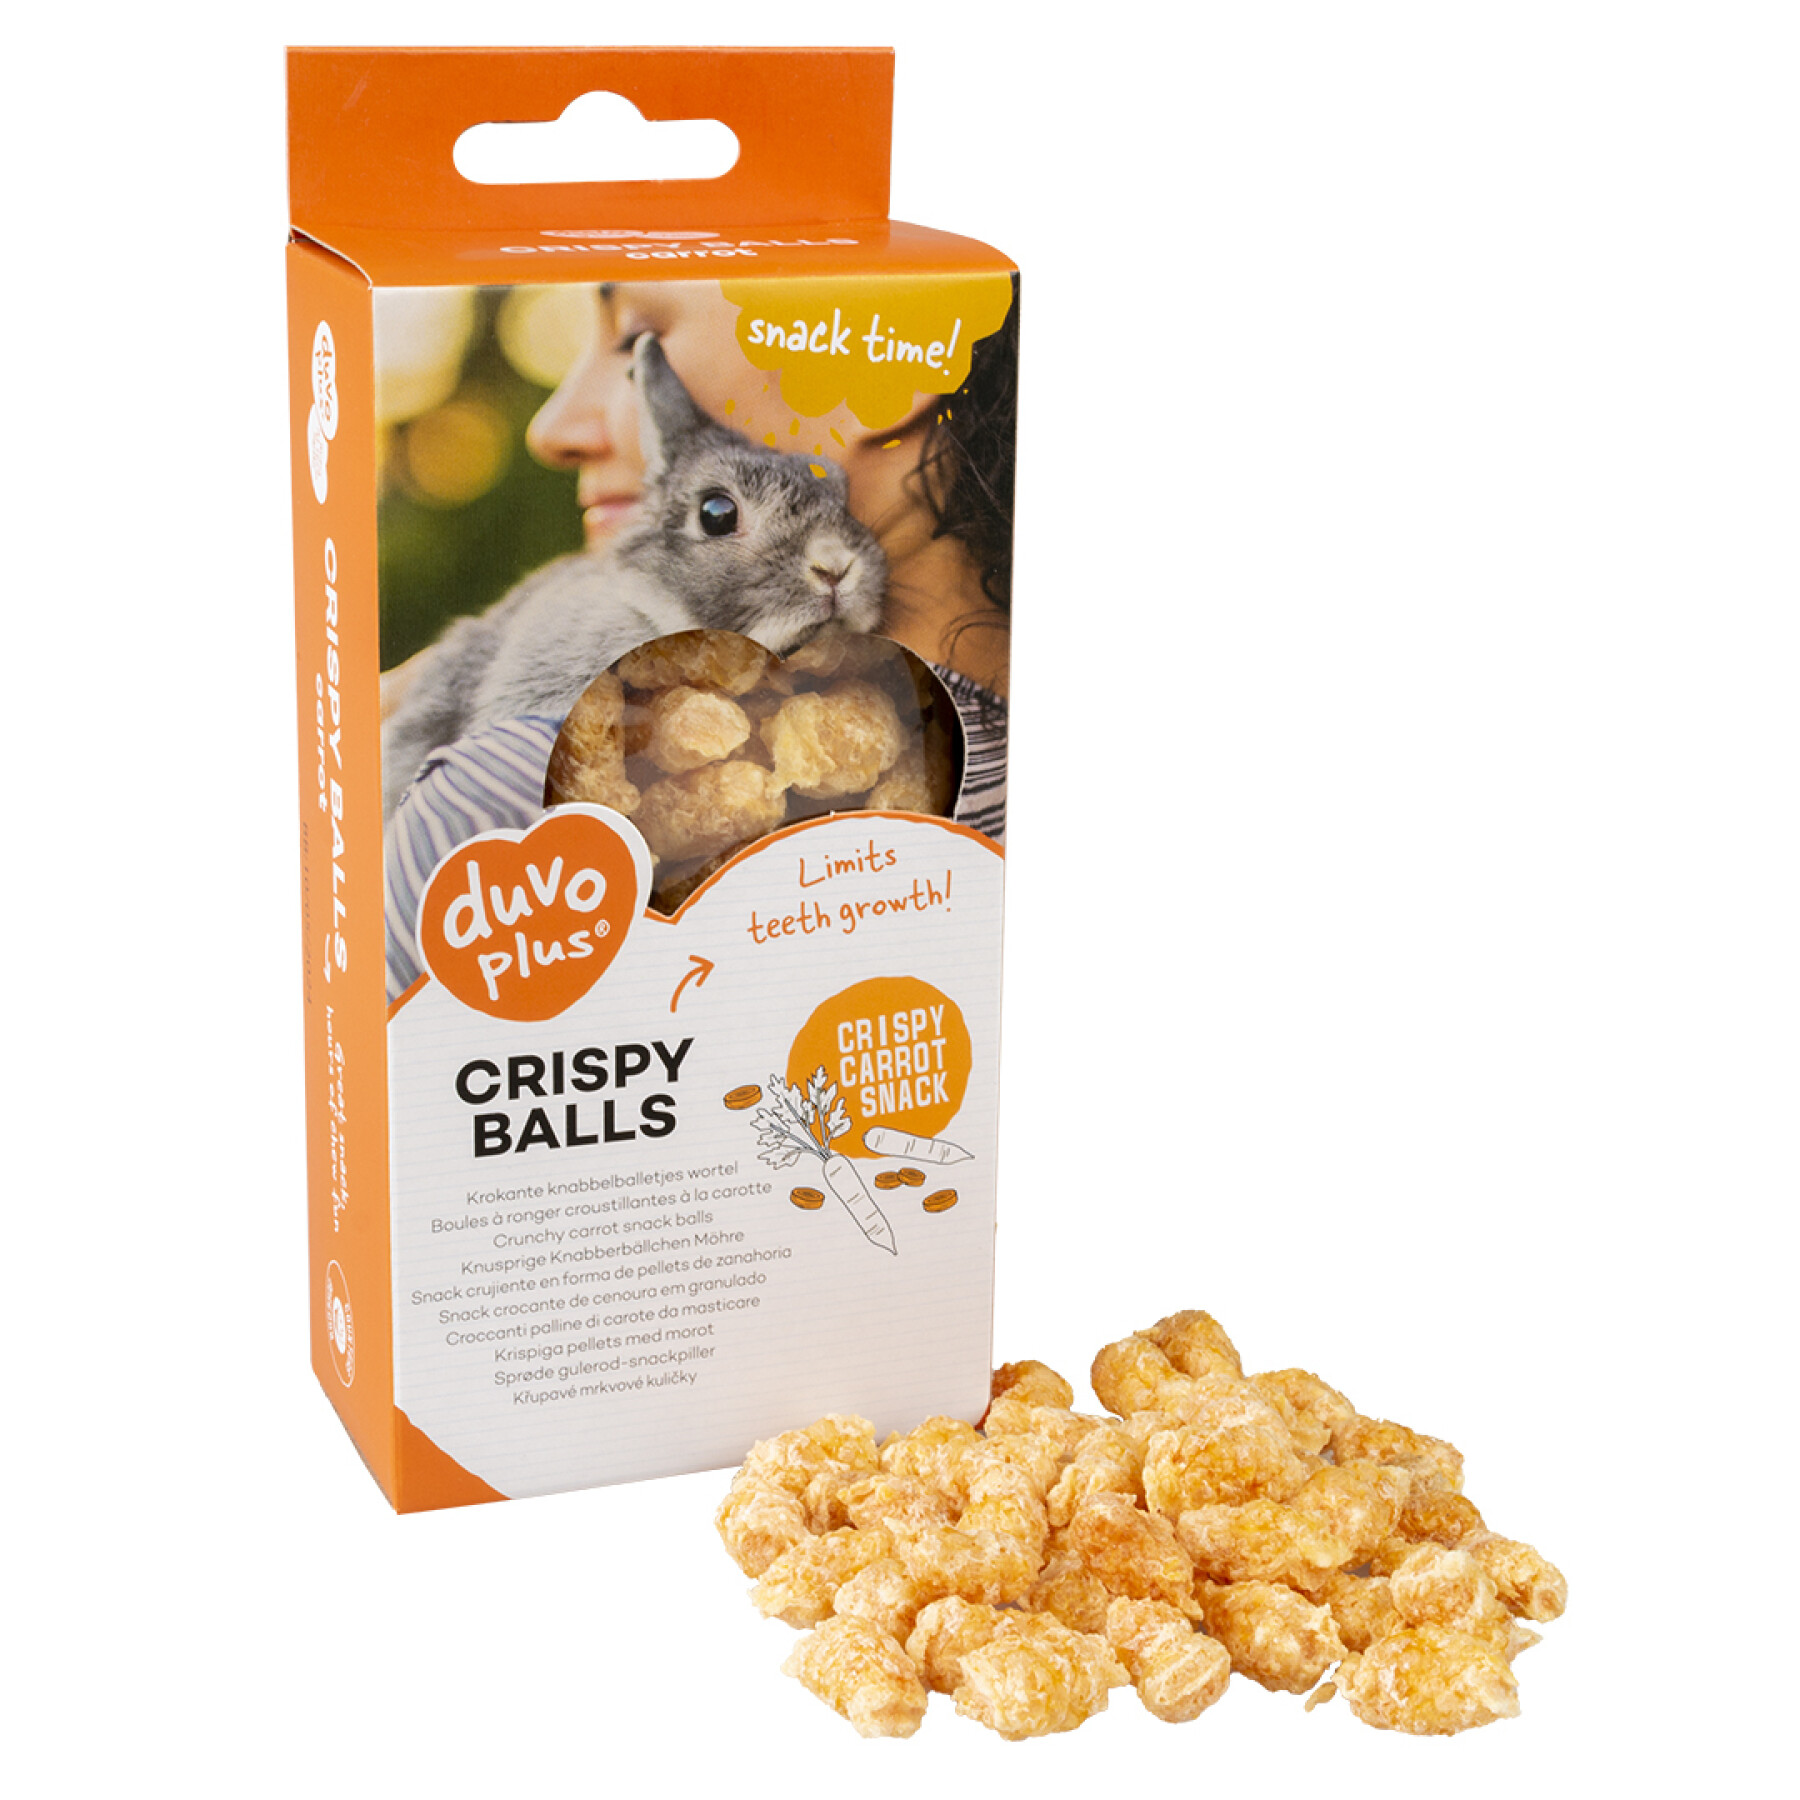 Crunchy carrot gnawing balls for rodents Duvoplus